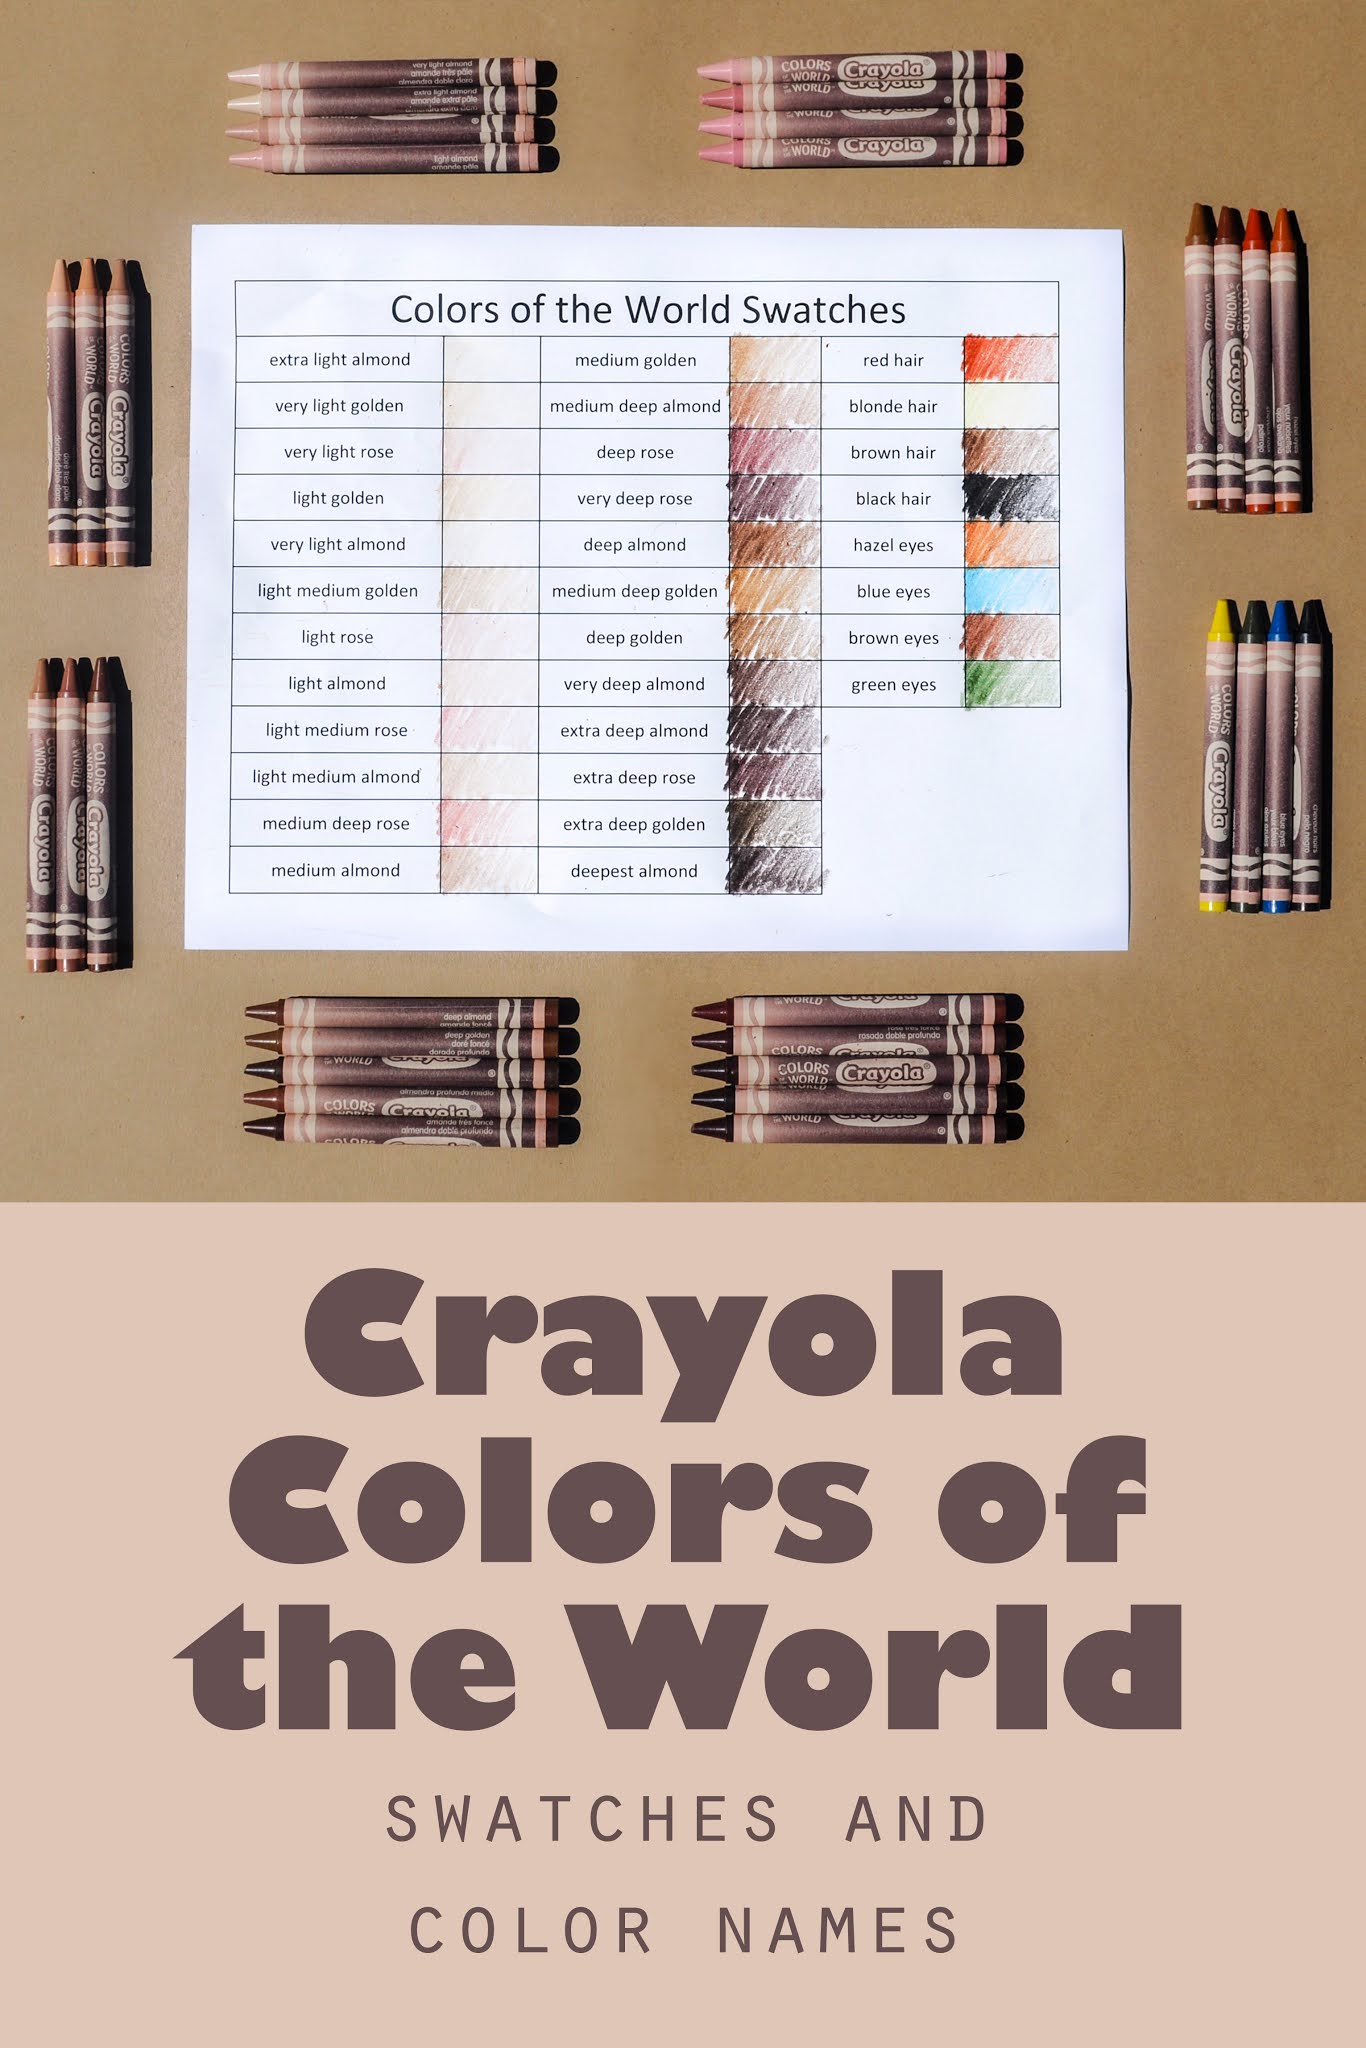 Crayola COLORS OF THE WORLD 32 Count Crayons Pack Box Skin Eyes Multicultural 